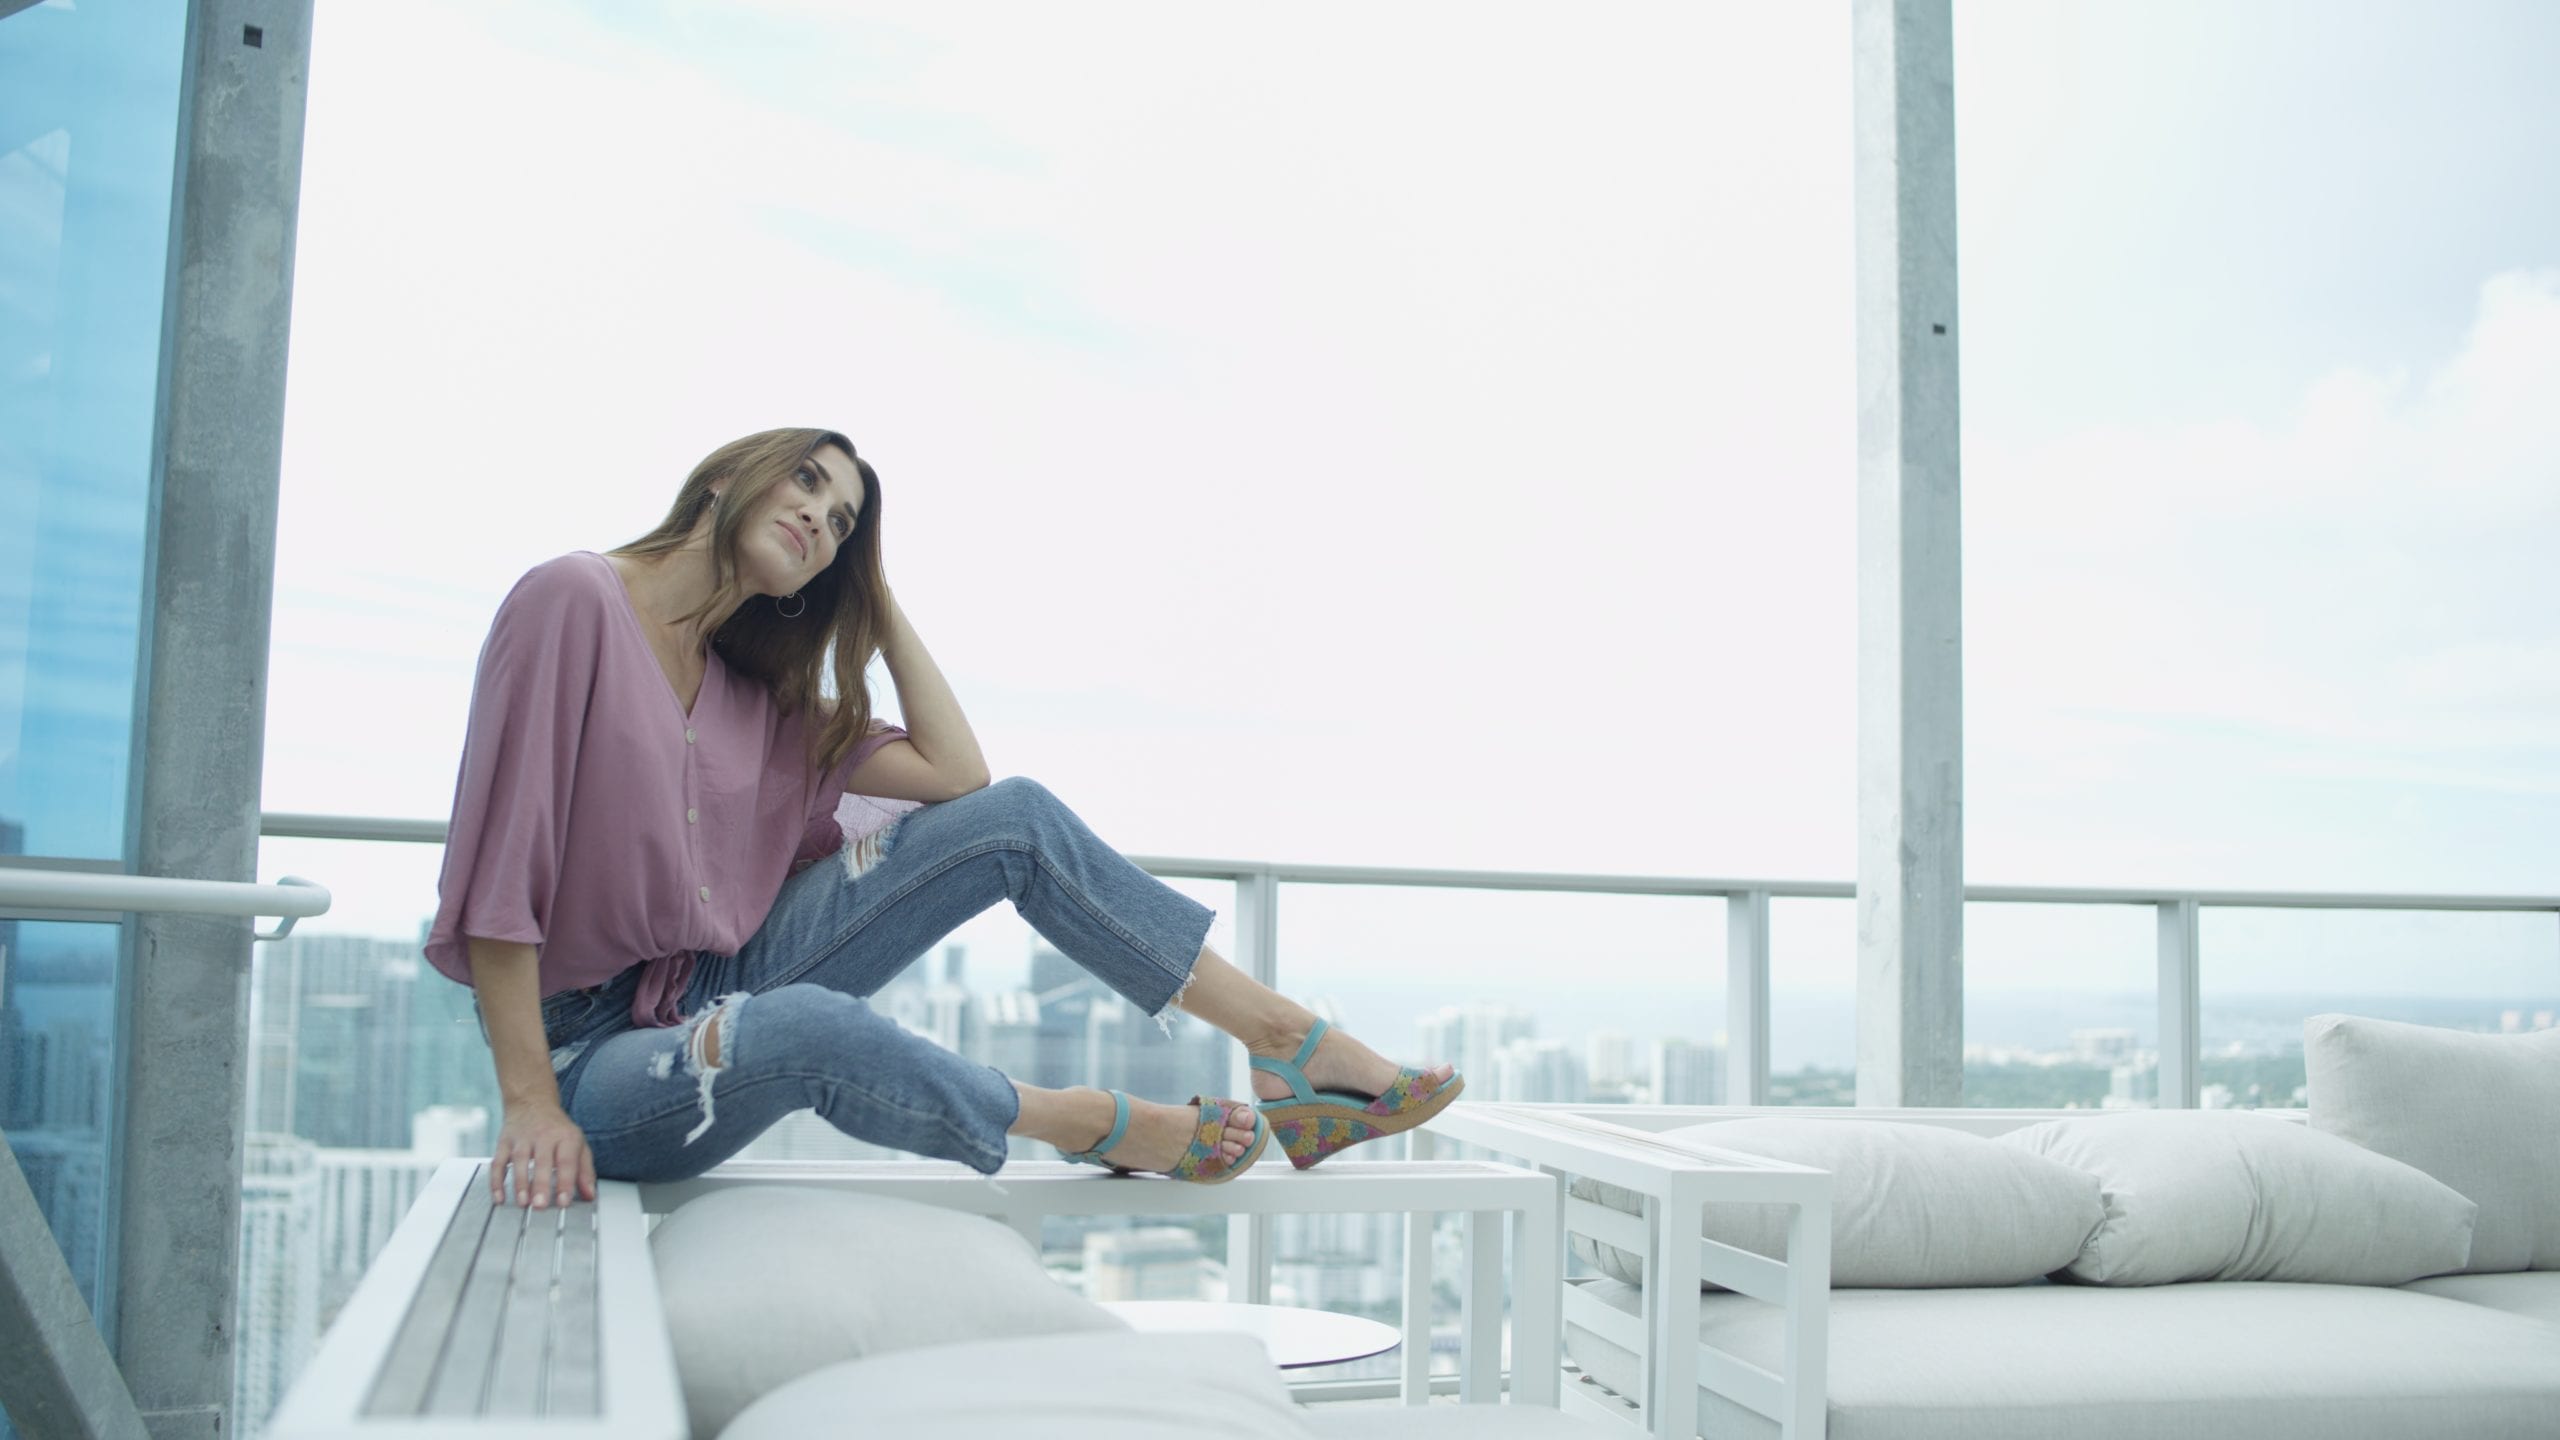 Spring Step Side profile of Lartiste Pranav posing for camera wearing light purple top and jeans with heels sitting on edge of patio furniture